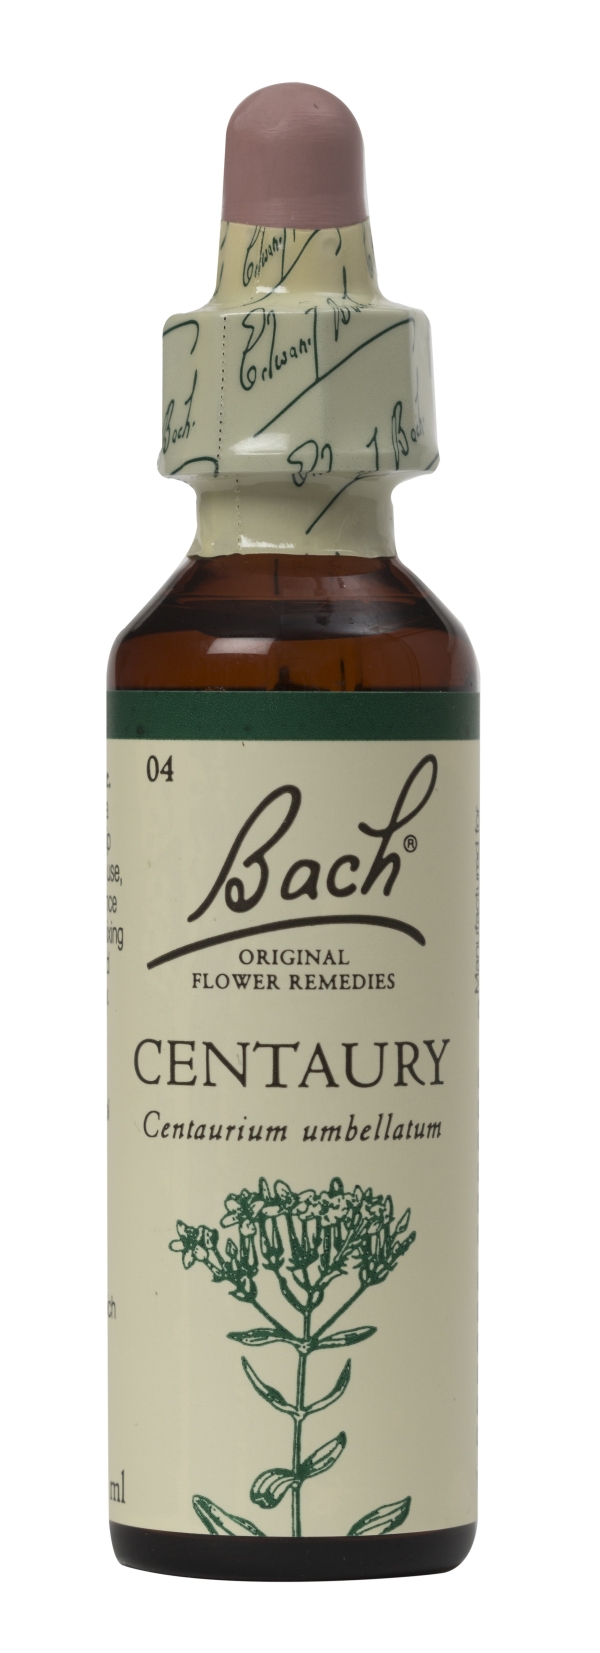 Nelson Bach Flower Remedies: Bach Centaury Flower Remedy (20ml) available online here